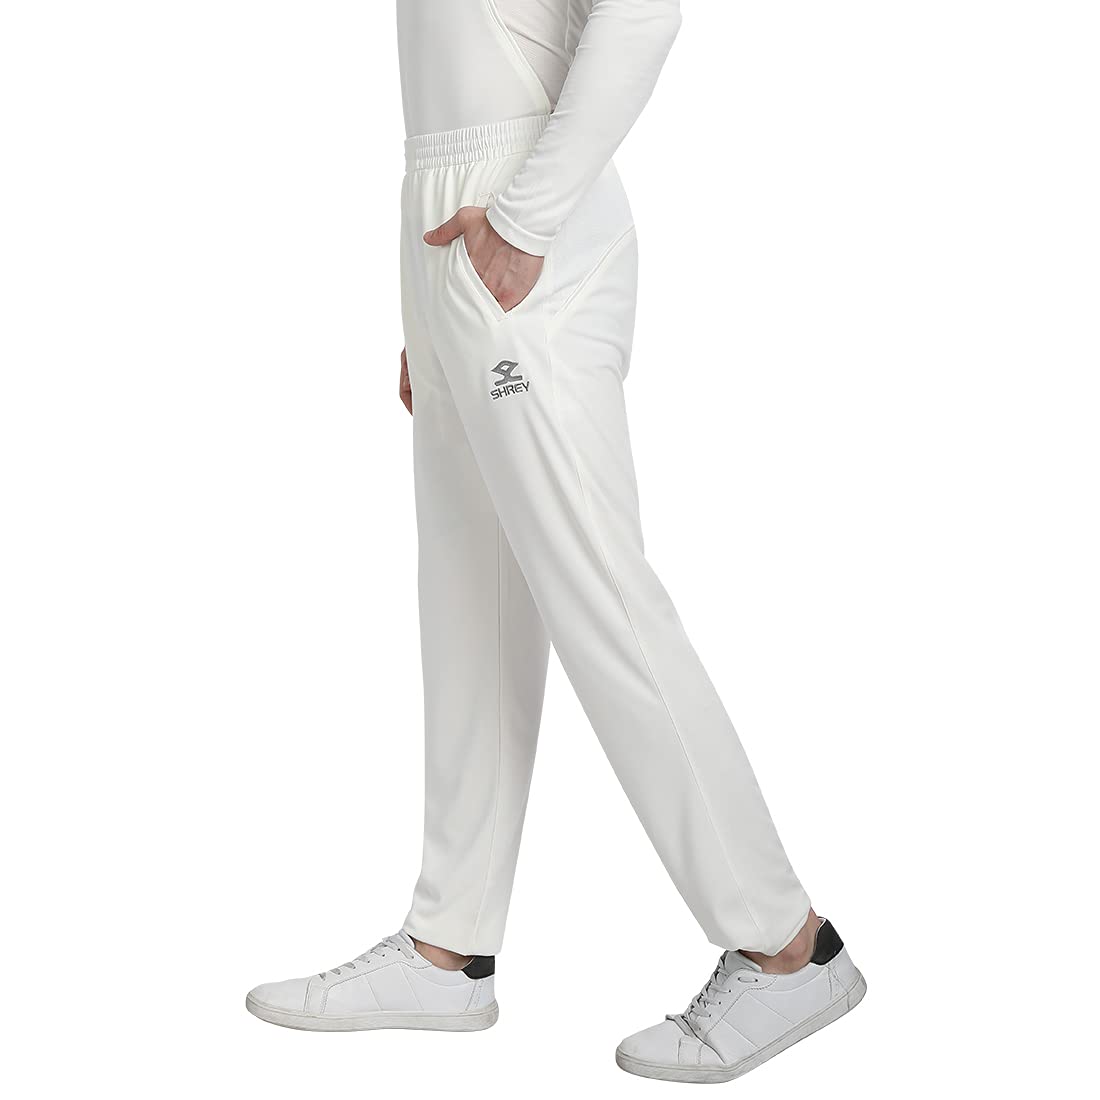 Cricket Track Pants Online Shopping  JW Cricket Whites Trousers